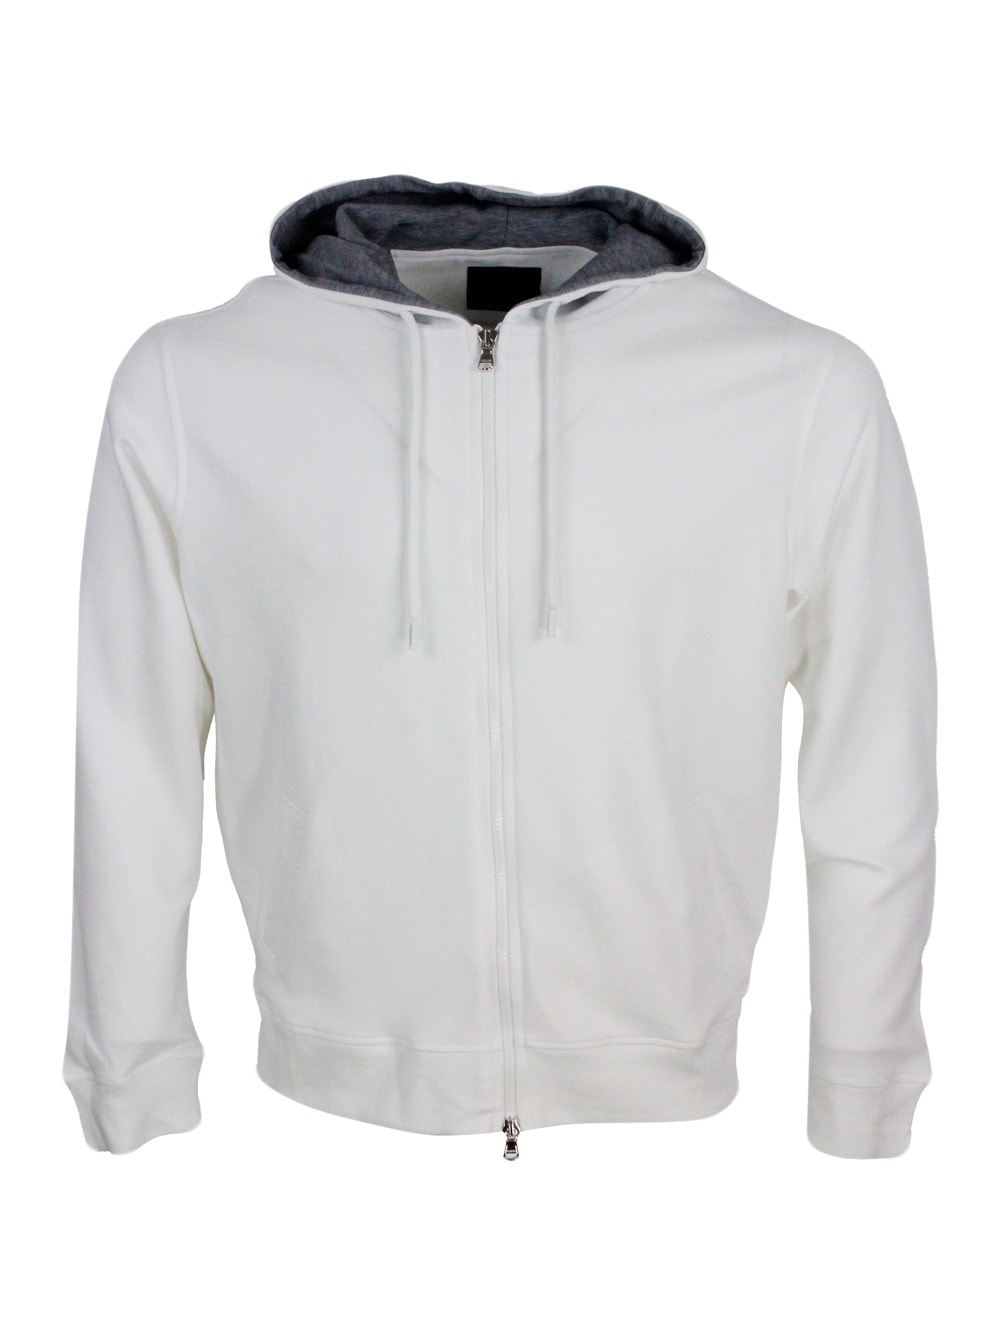 Lightweight Stretch Cotton Sweatshirt With Hood With Contrasting Color Interior And Zip Closure